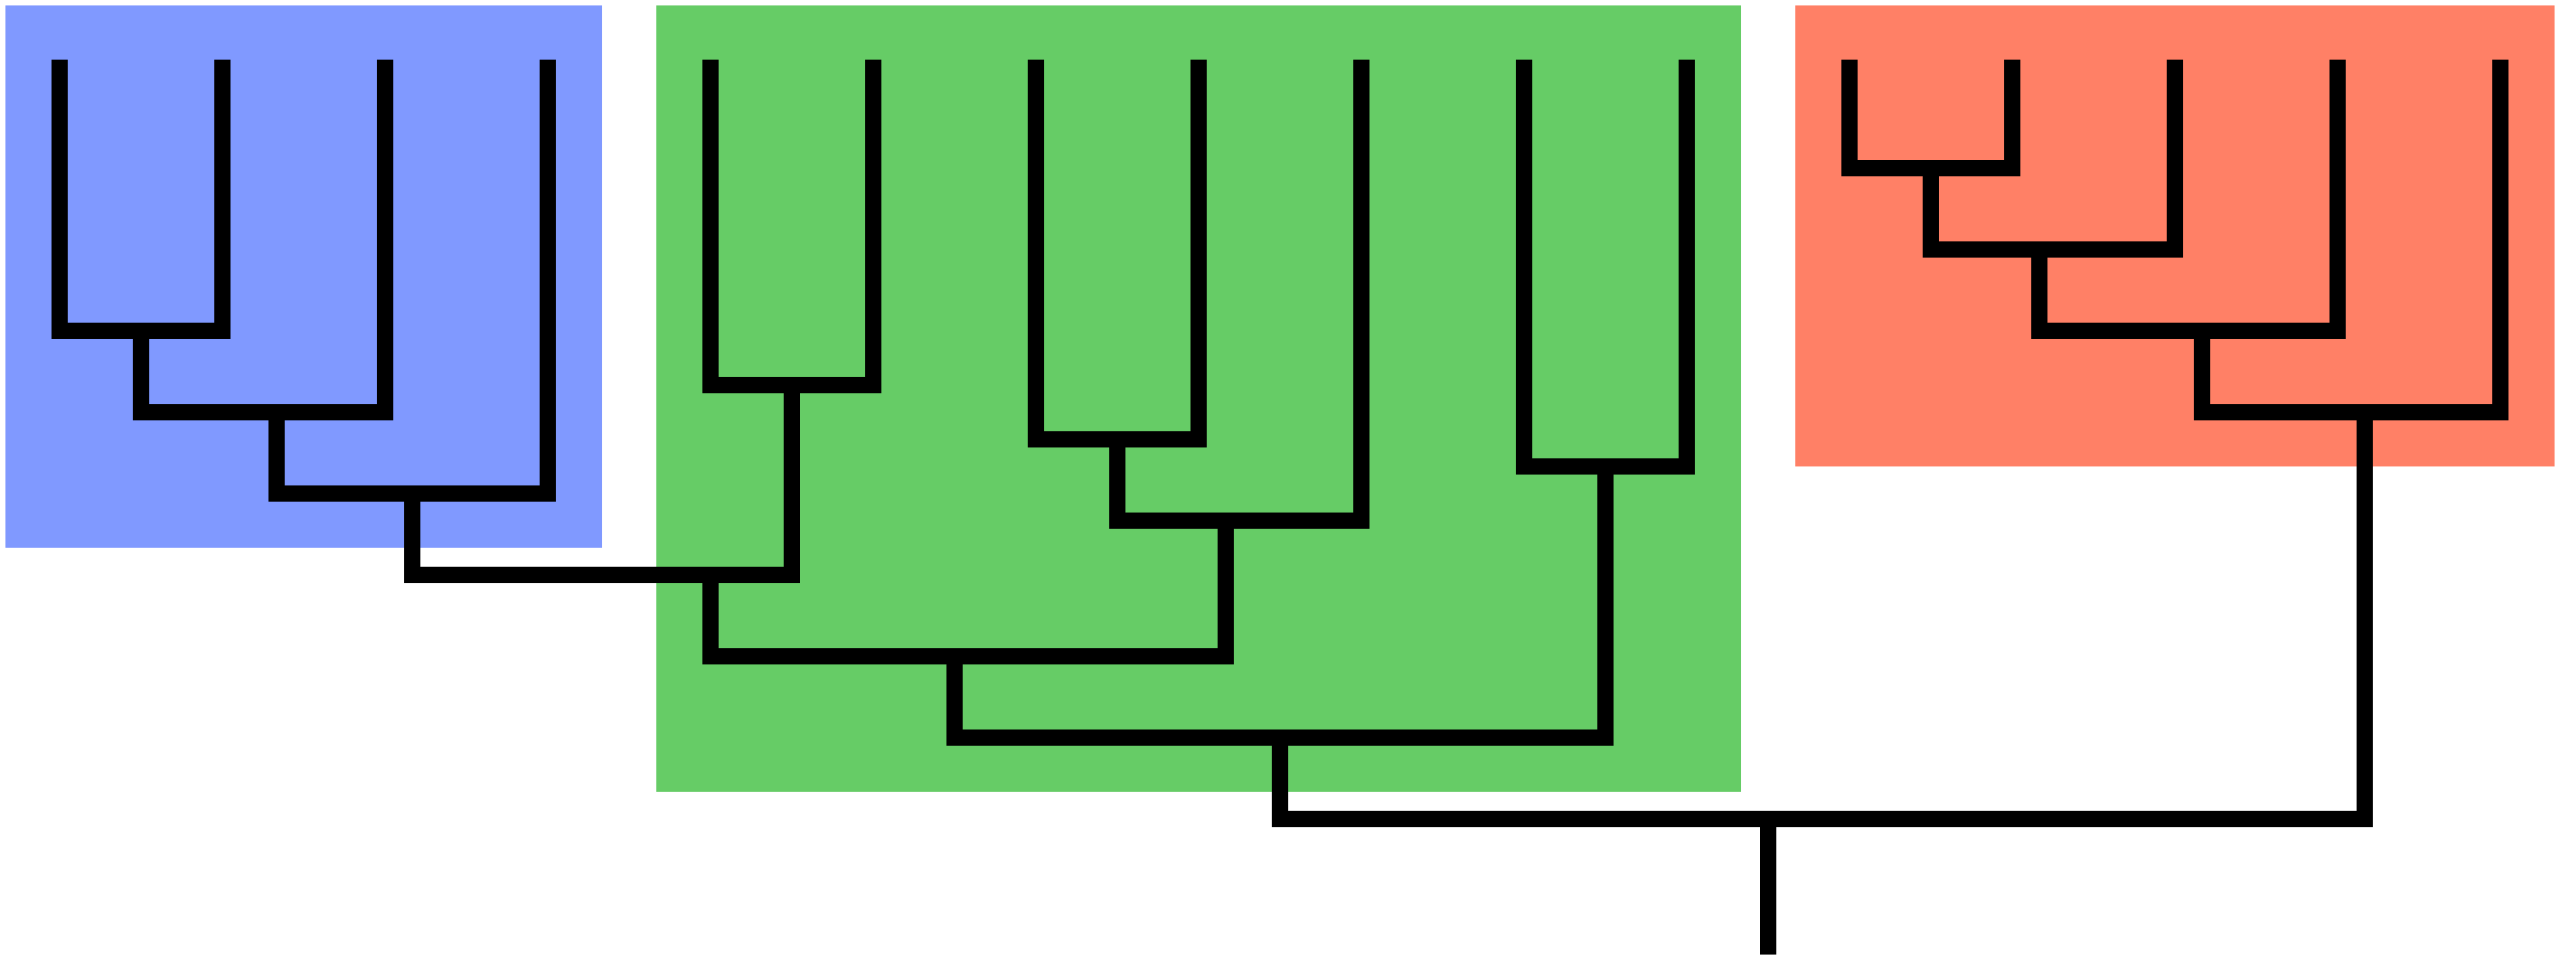 The figure shows a phylogenetic tree with sixteen branch tips. Three groups are shaded. The groups shaded red and blue contain a common ancestor and all of its descendants. The group shaded green contains a common ancestor and some, but not all, of its descendants.